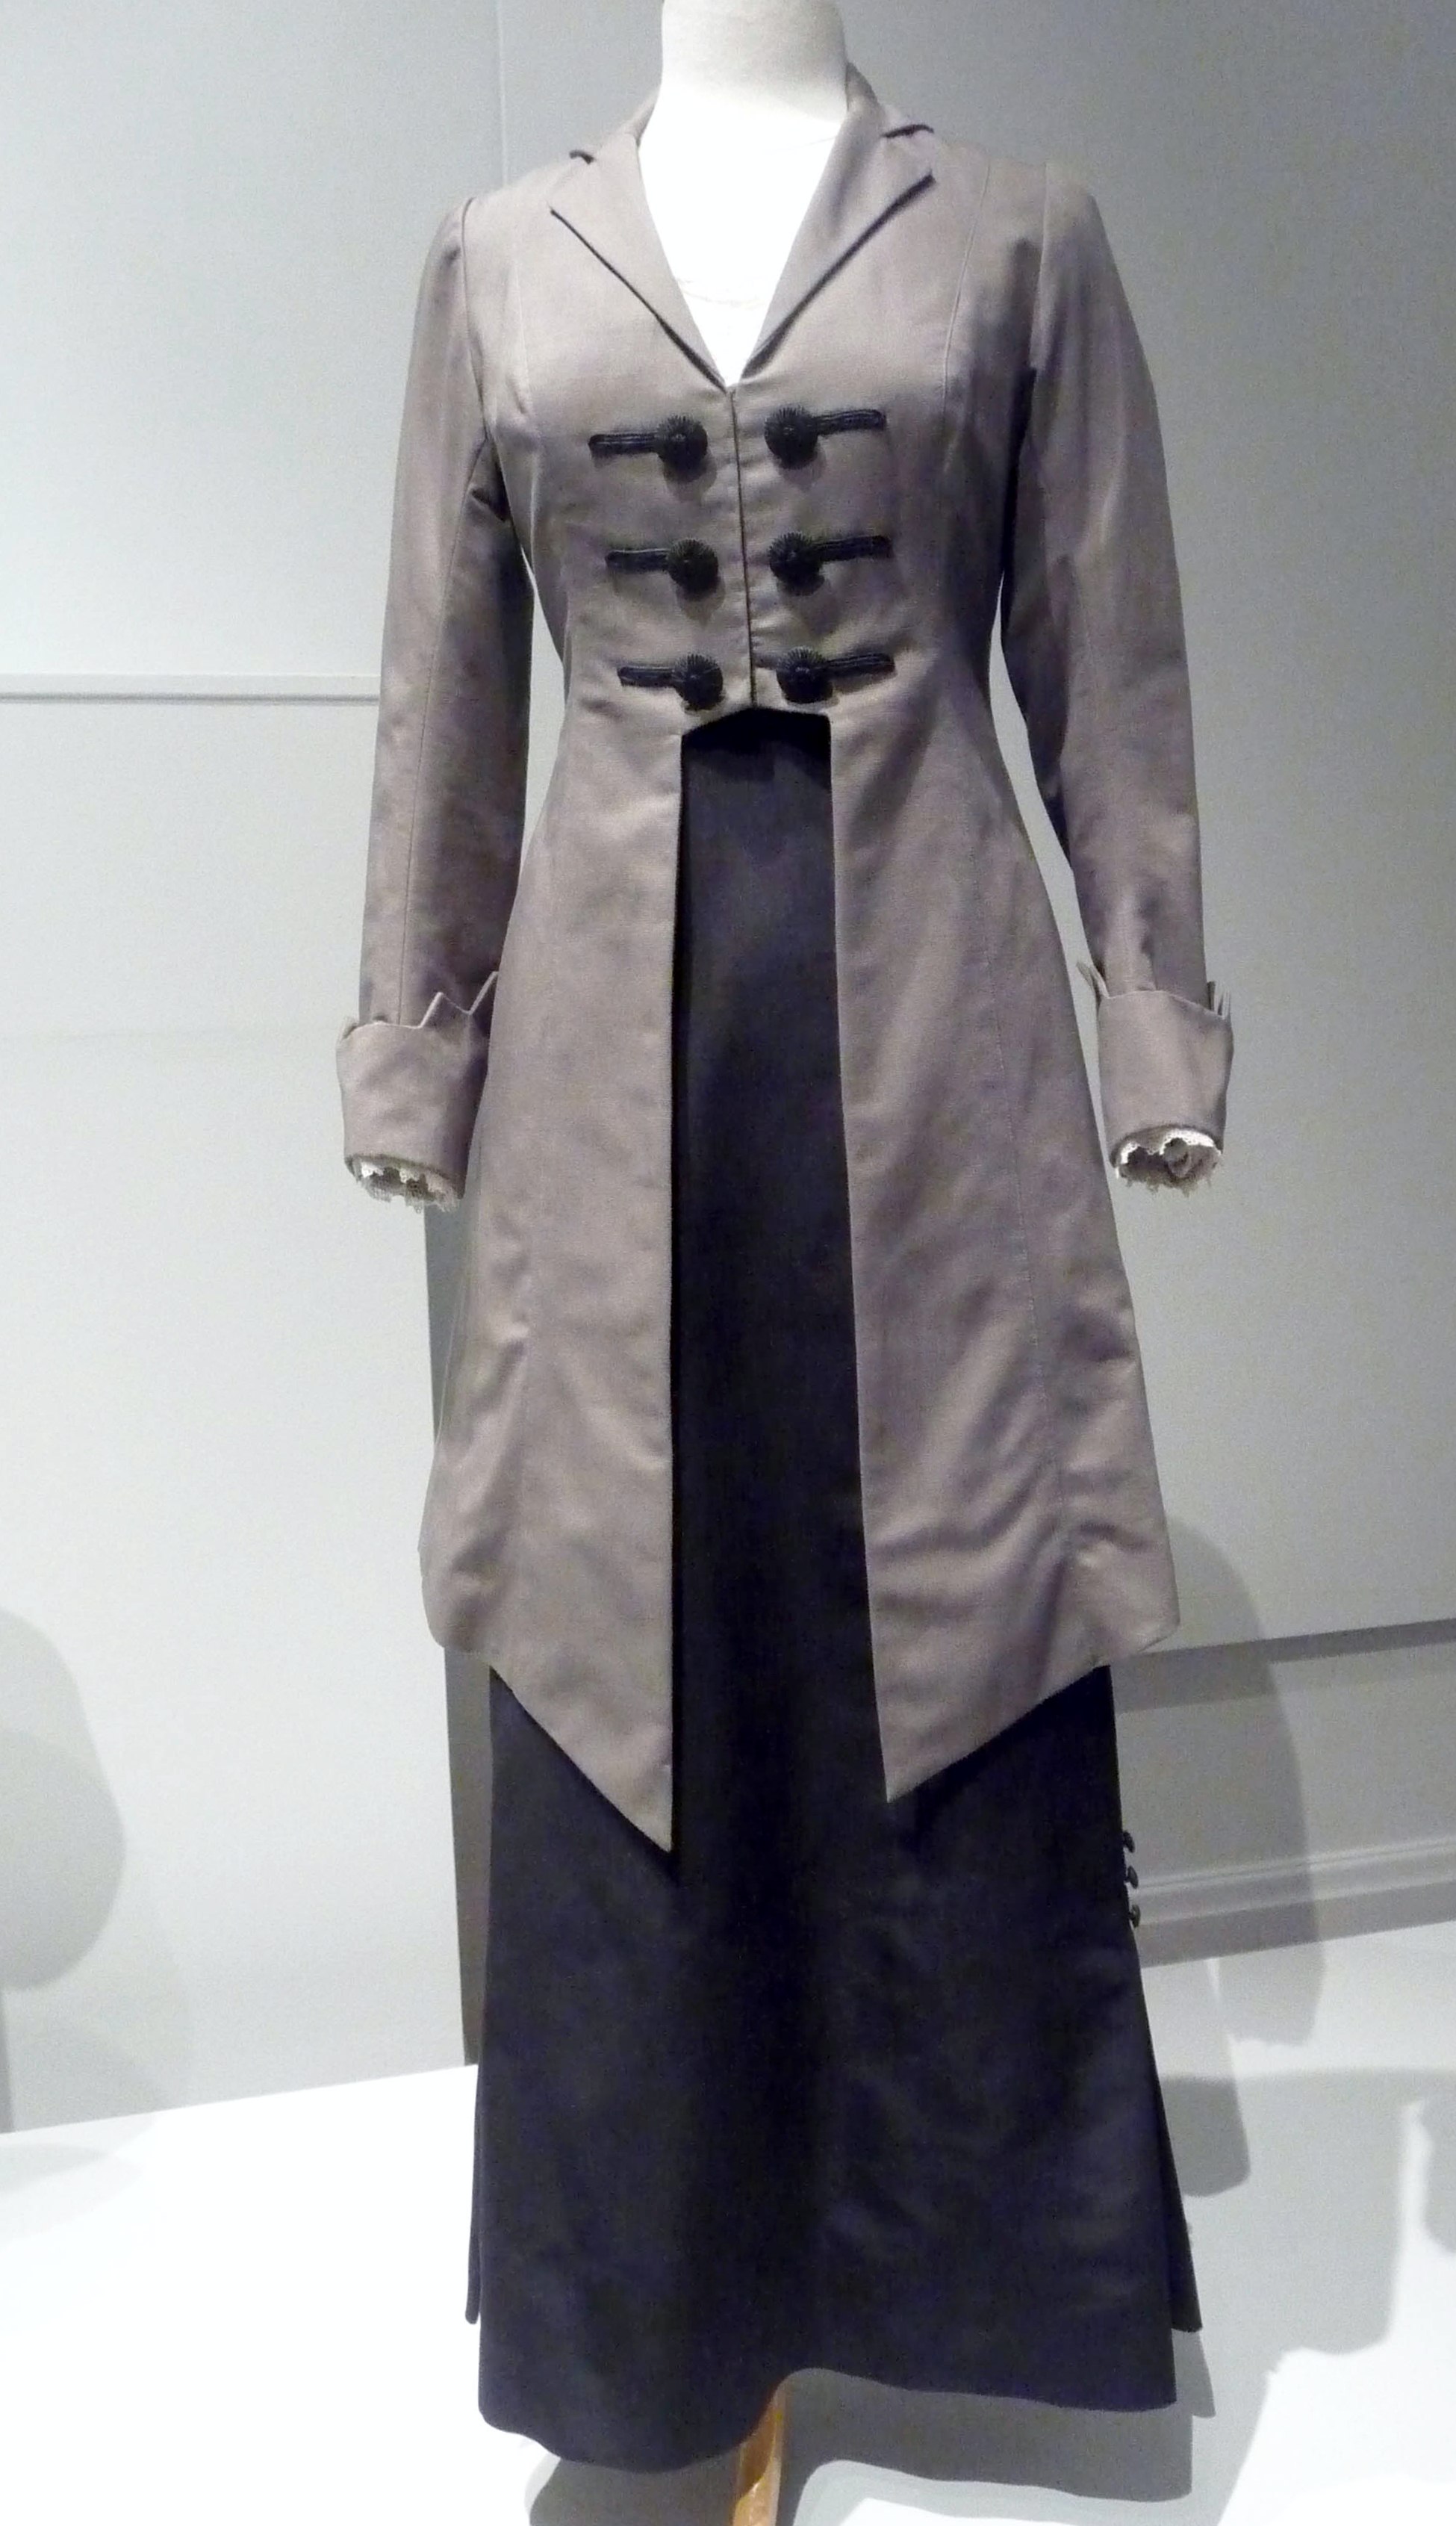 WALKING OUTFIT, gros grain wool and silk,cotton lace inserts, made by Cosprop, 2009. These hobble skirts were very fashionable around 1912. Worn by Samantha Bond as Lady Rosamund Painswick in Downton Abbey.